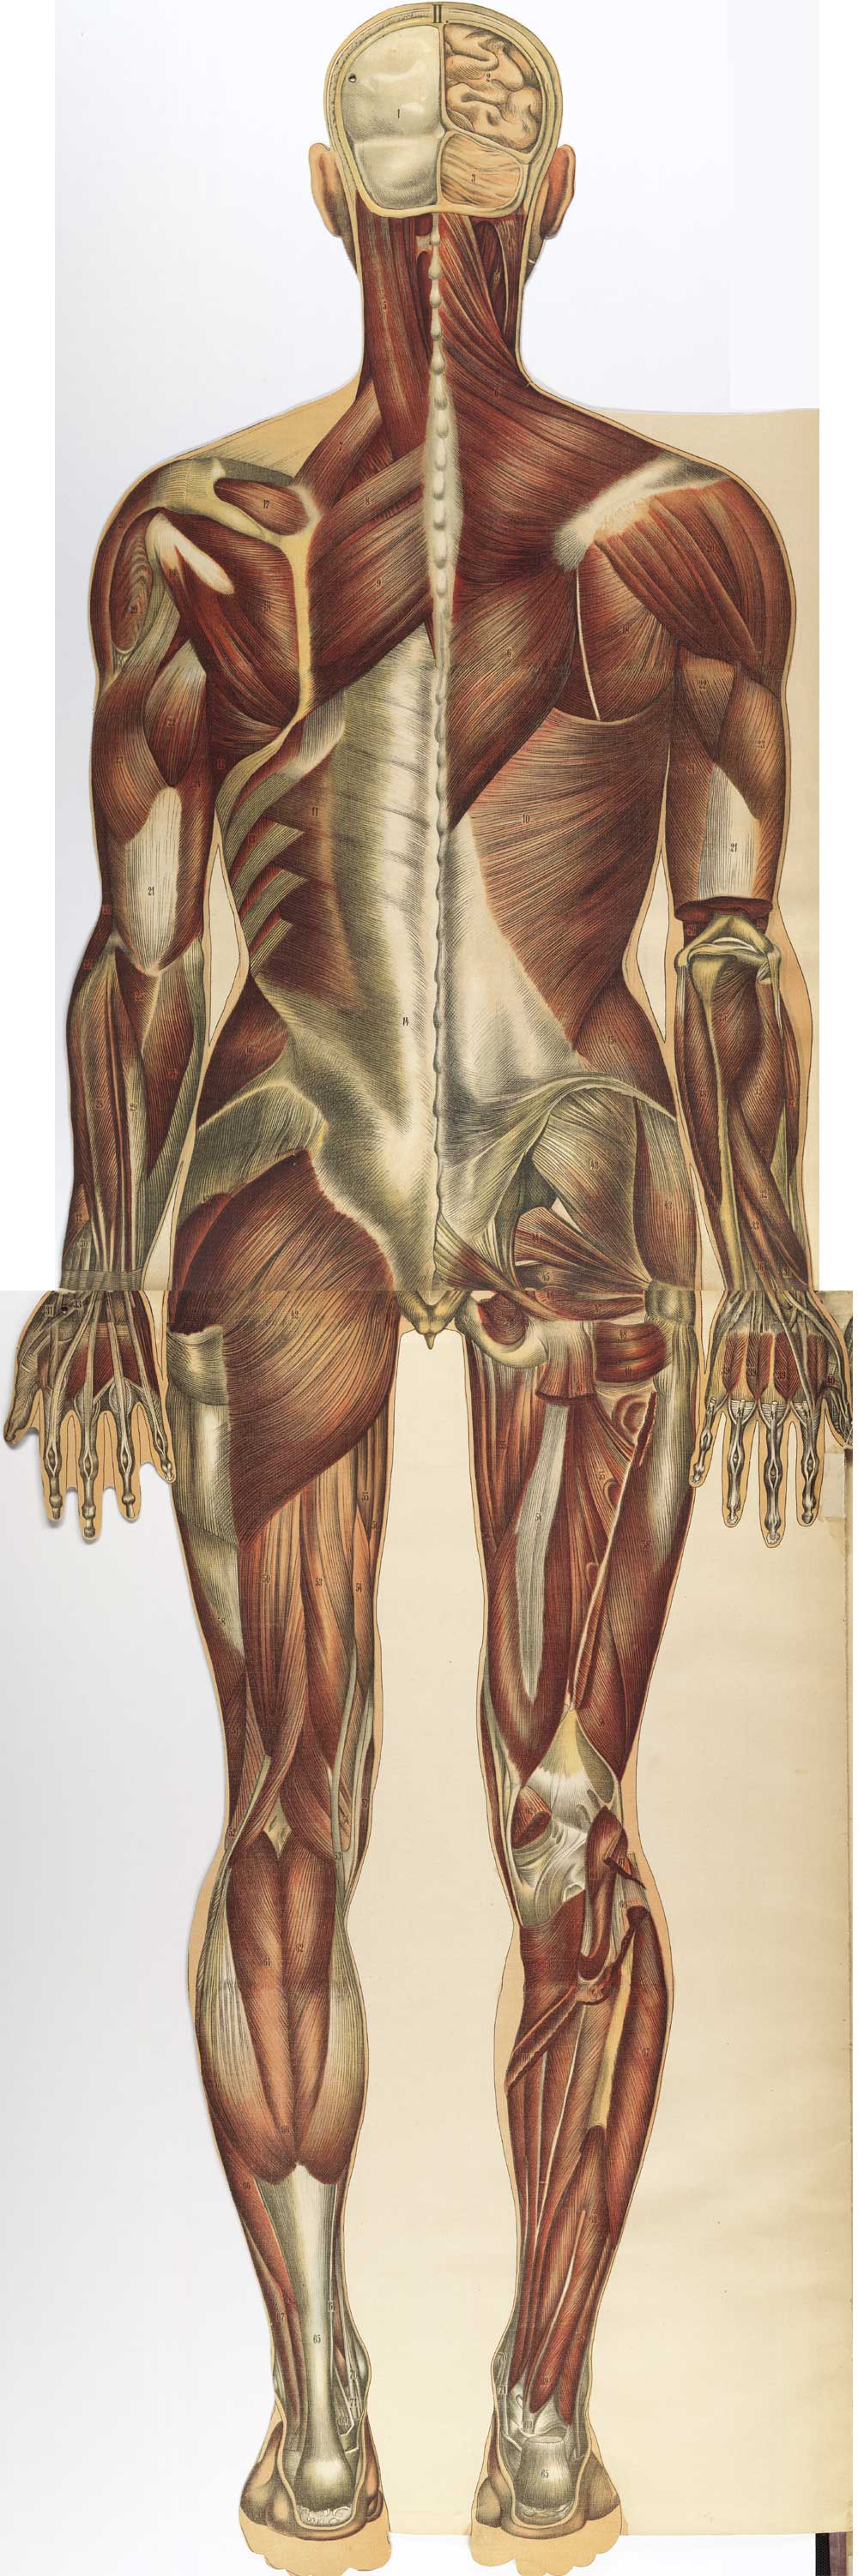 Chromolithograph showing the musculature of the back of the human body, from Julien Bouglé’s Le corps humain en grandeur naturelle, NLM Call no. WE B758c 1899.